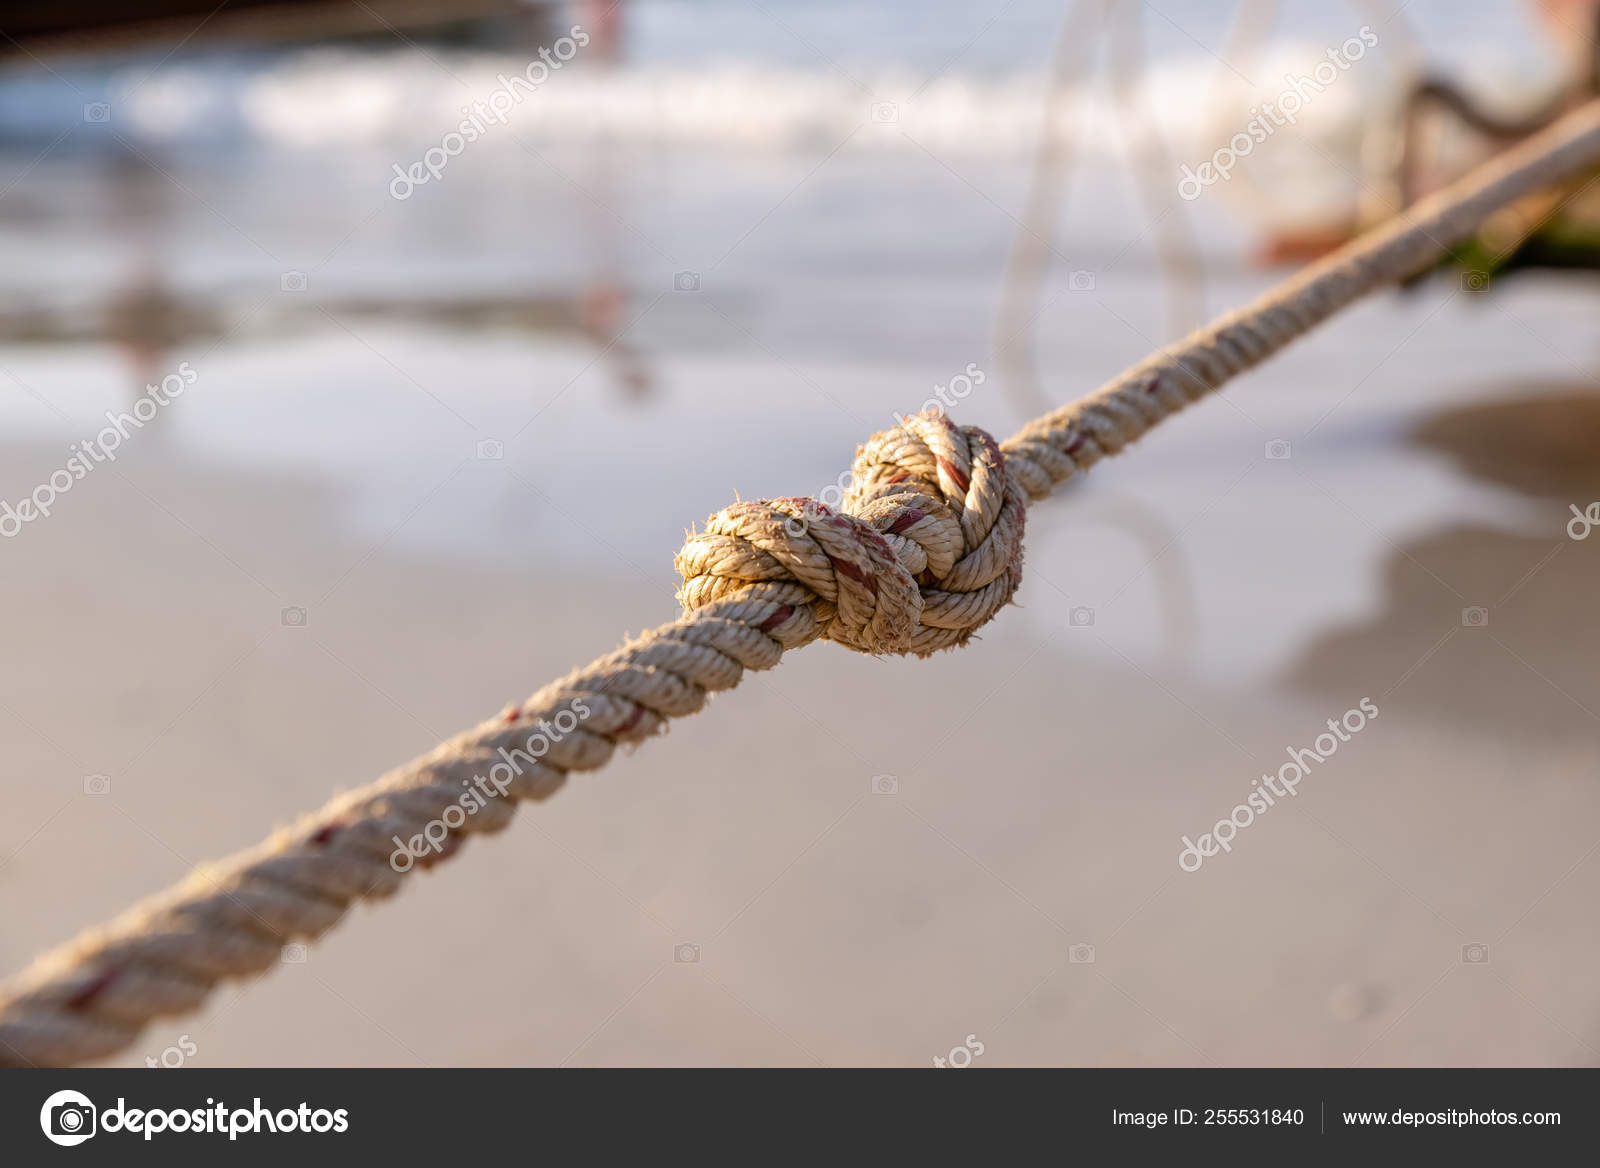 Rope, with a single tight knot, suspended horizontally in the air, against  black background — Stock Photo © Spritnyuk #255531840